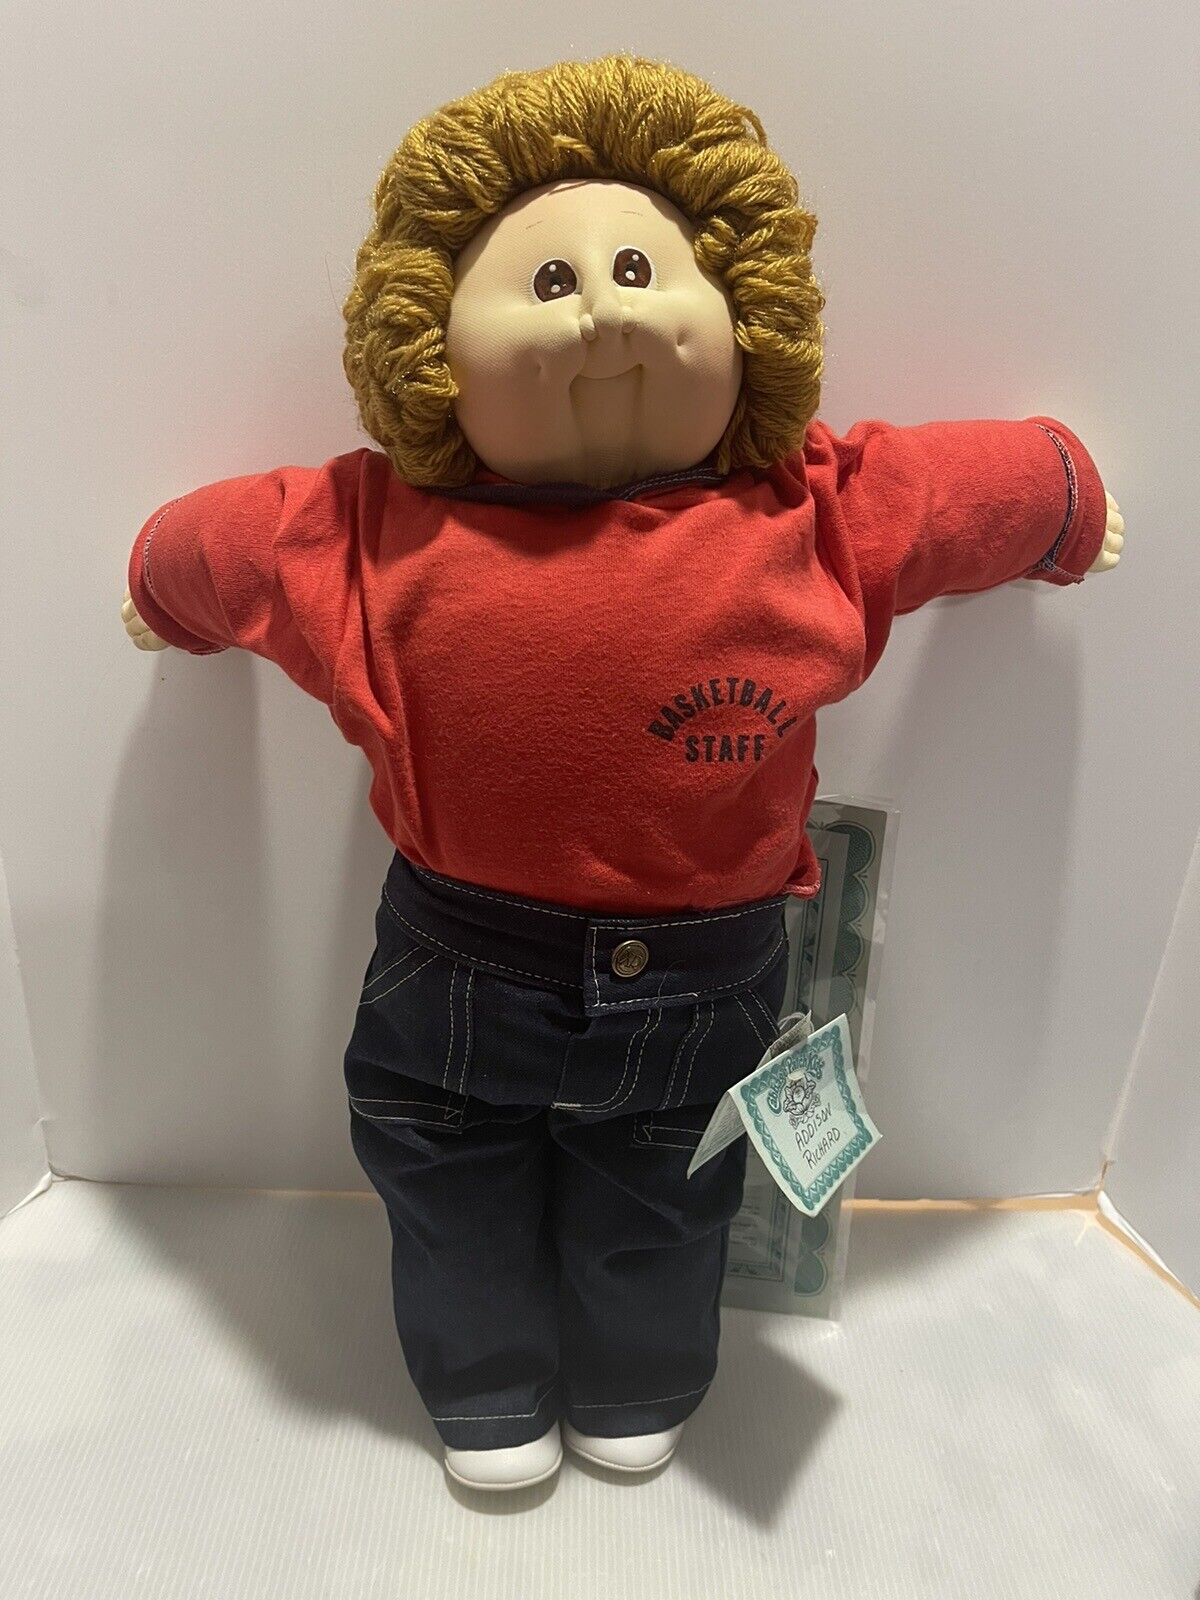 RARE 1984 The Little People Addison Richard  Soft Sculpture Cabbage Patch